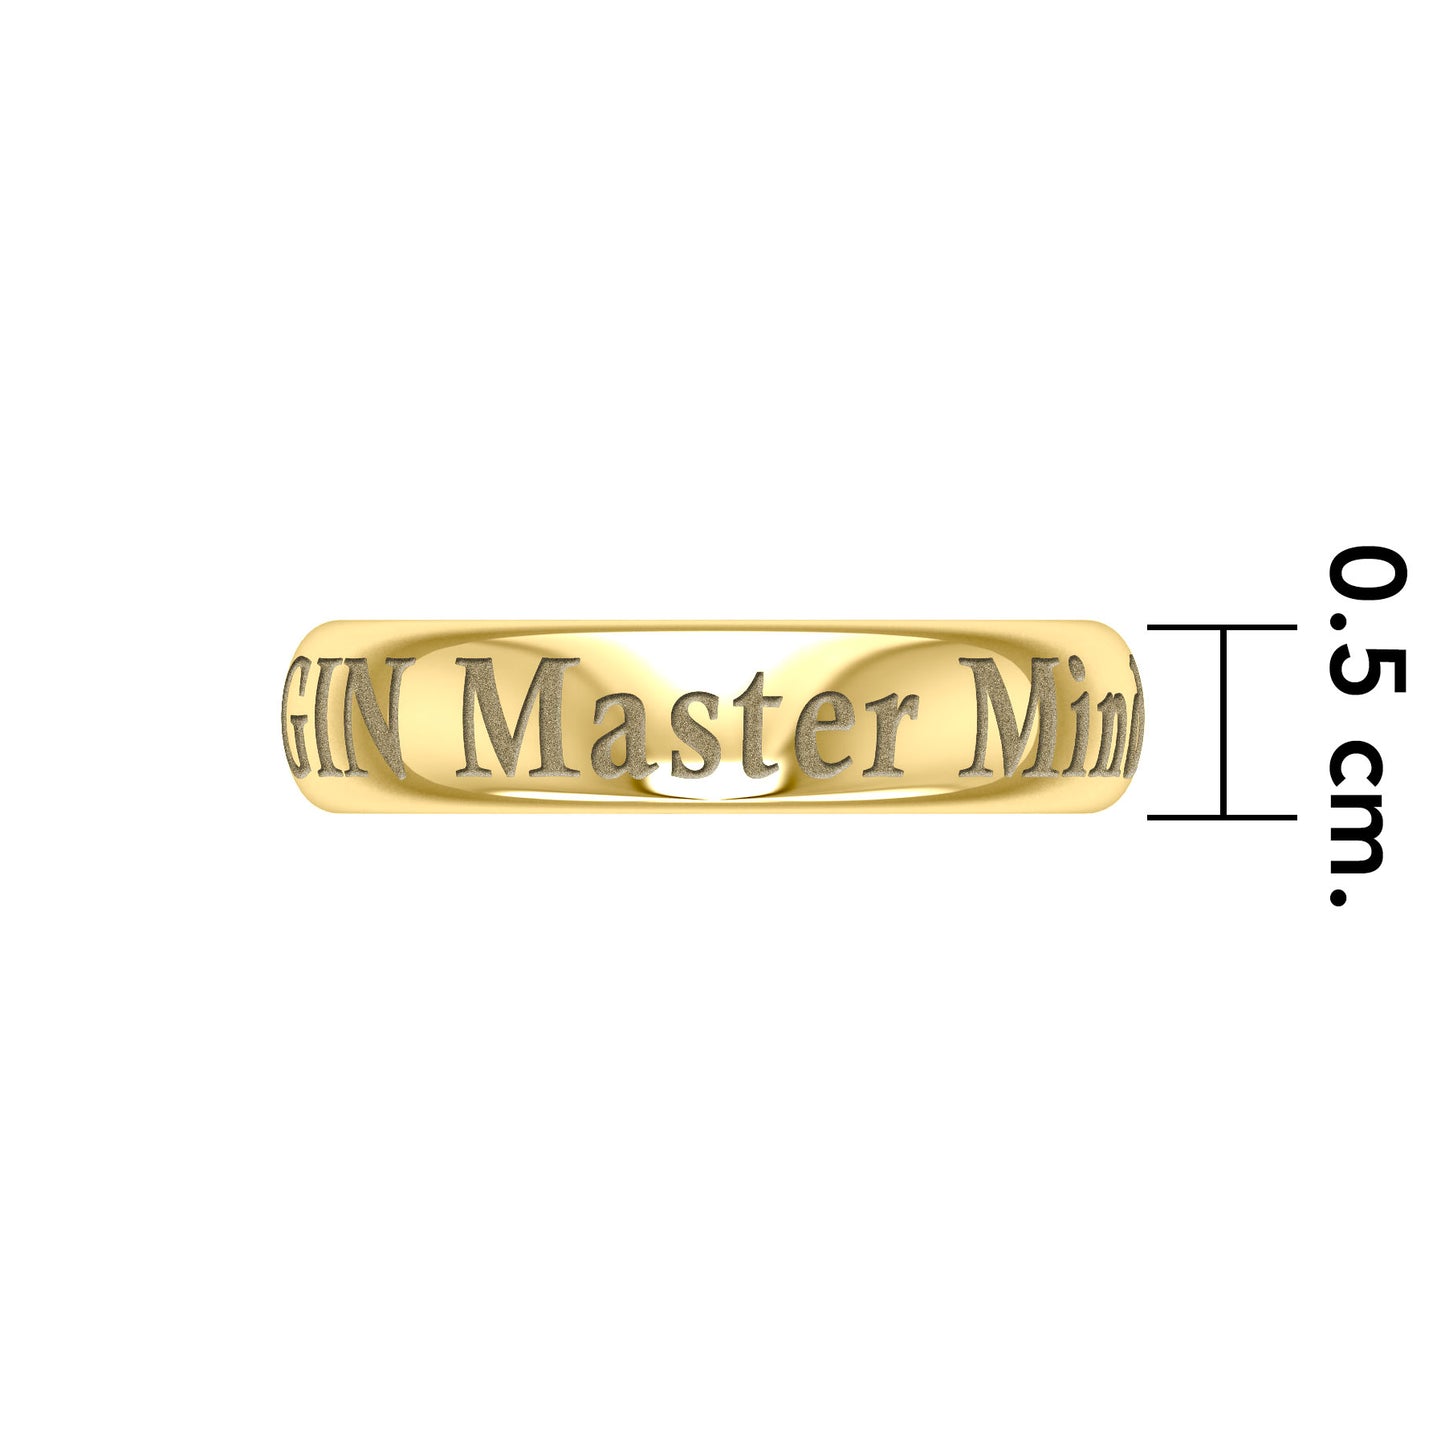 Gin Master Mind Gold Vermeil Plate on Silver Band Ring VRI1095